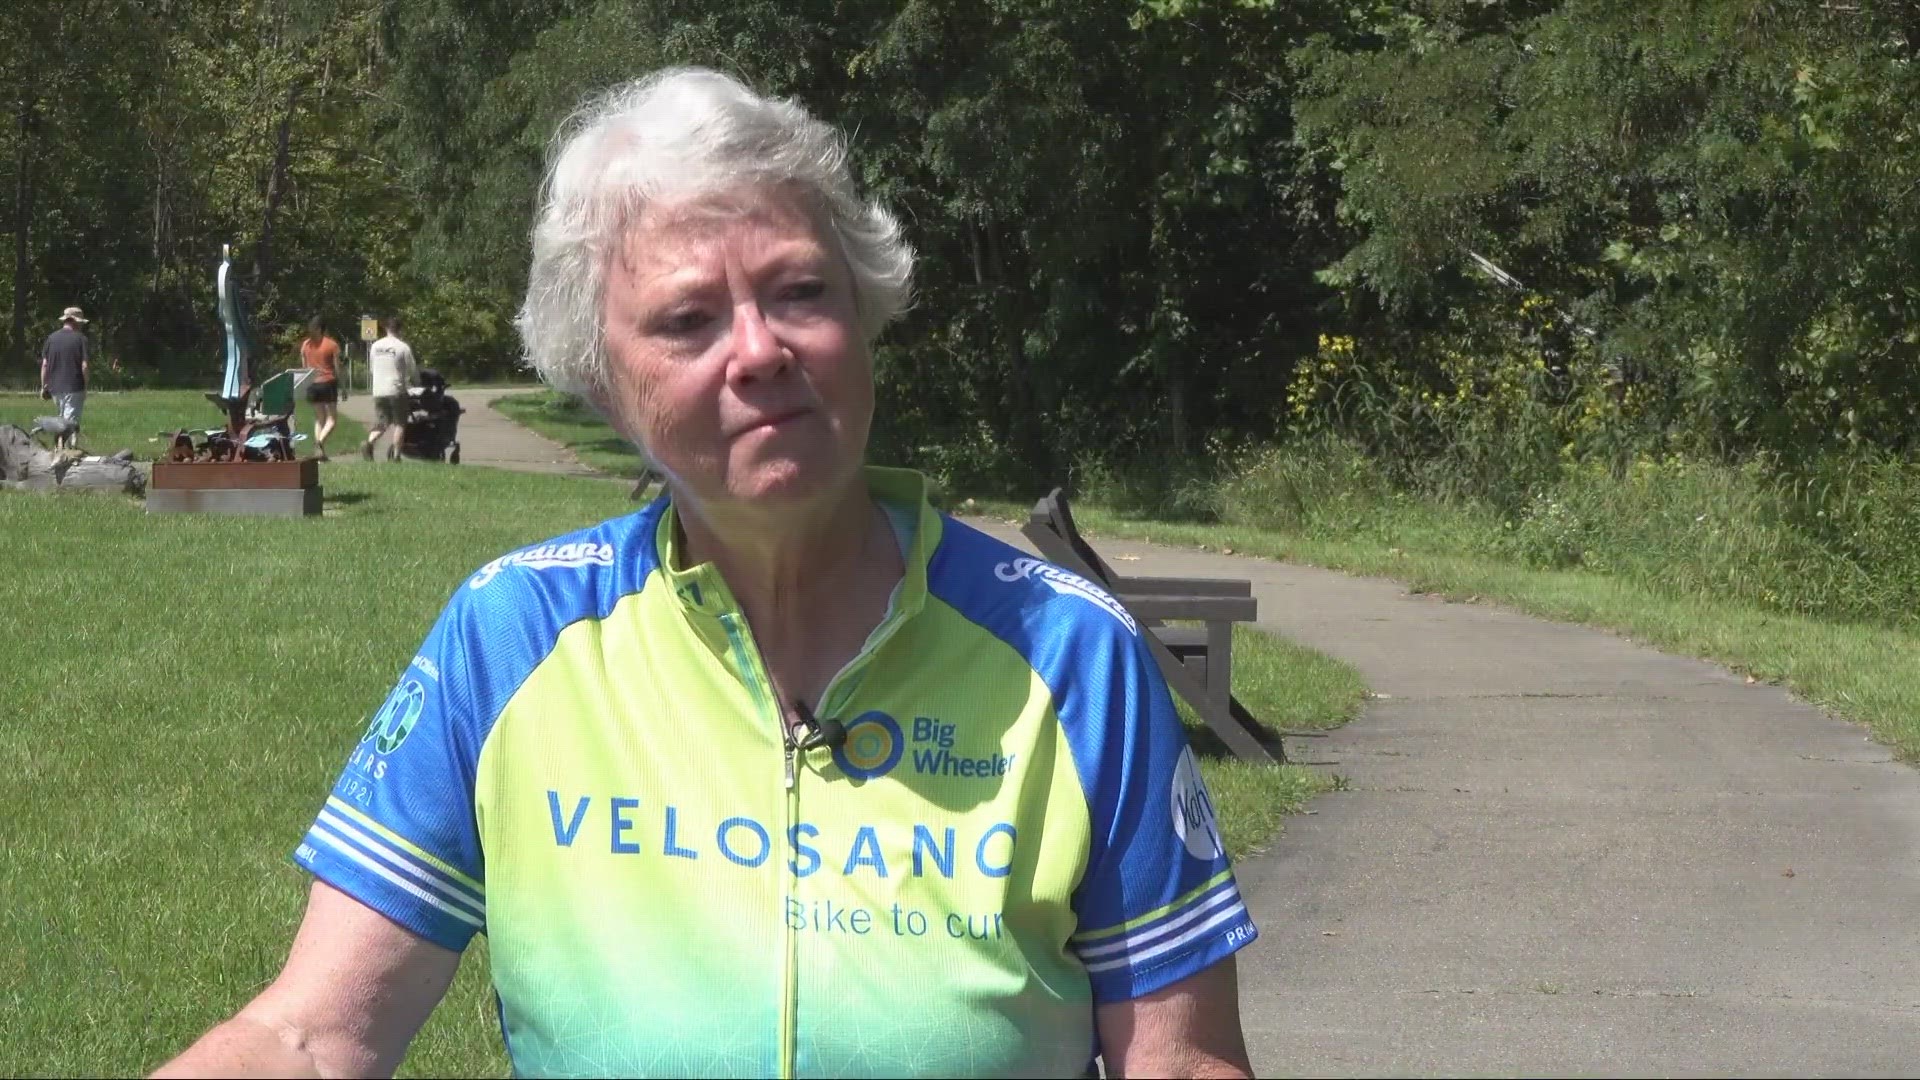 Sandy Selby will be participating in her 6th VeloSano.